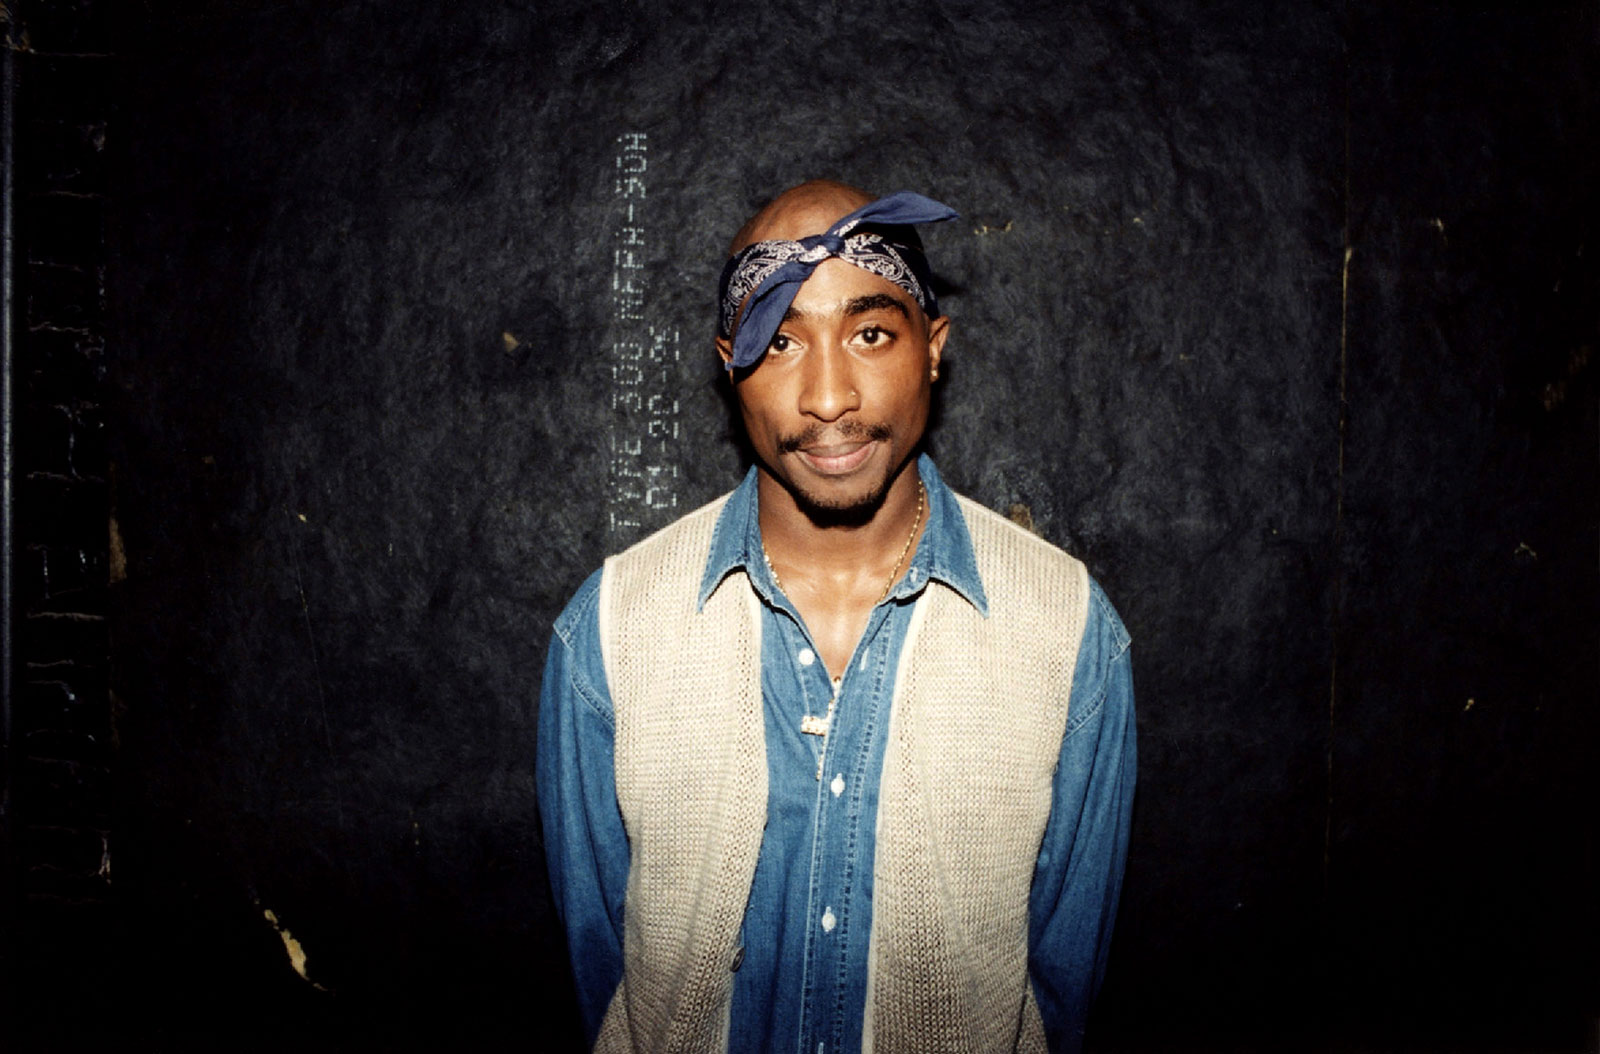 Tupac Shakur is seen backstage after a performance in Chicago in March 1994.